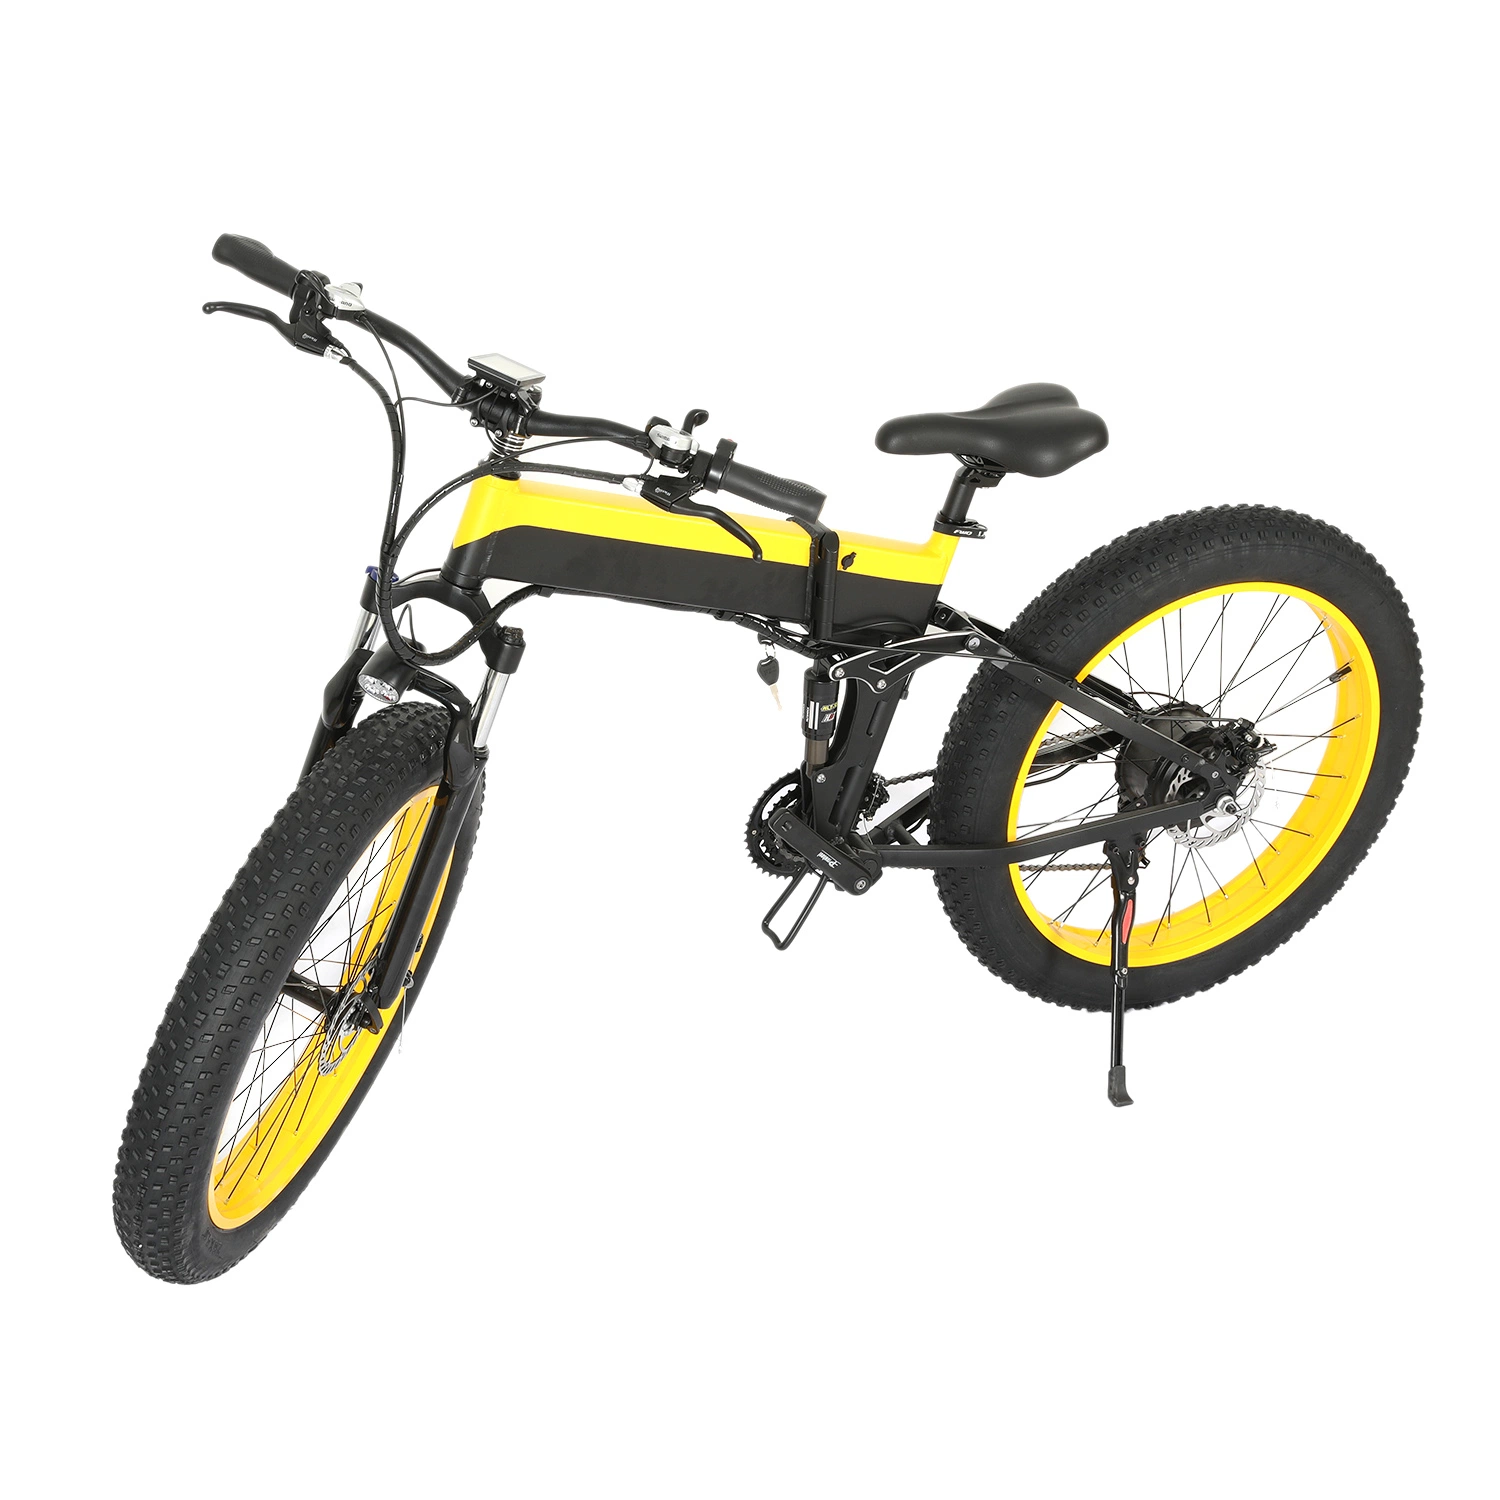 26inch Light Folding Bike Electric City Bicycle Electric Mountain Bike Vehicle Bicycle with 500W Brushless Motor 36V 8ah Battery Electric Vehicle Dirt Bike